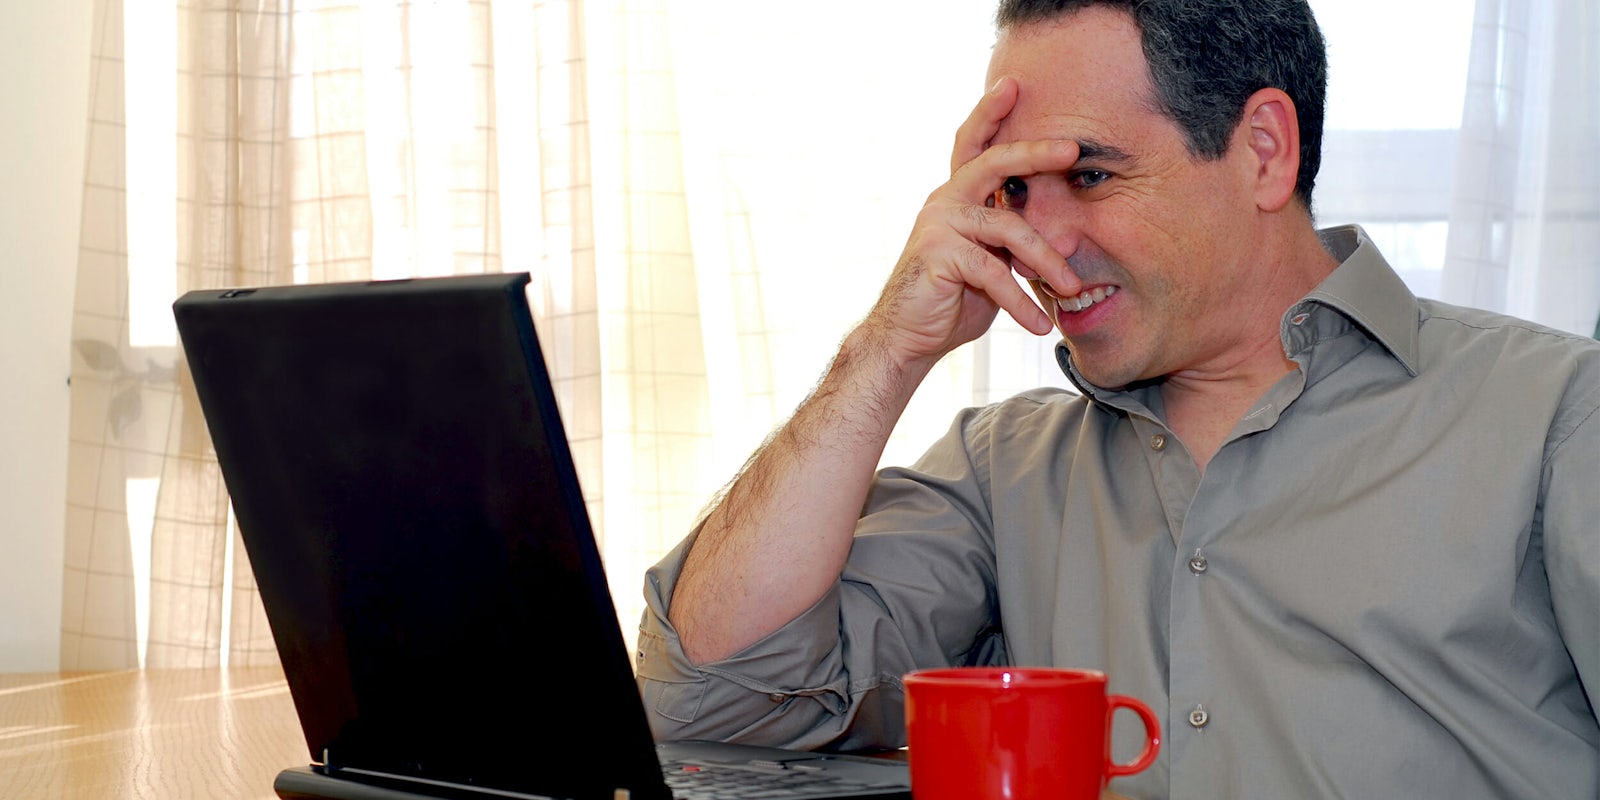 Man partially covering face while looking at laptop